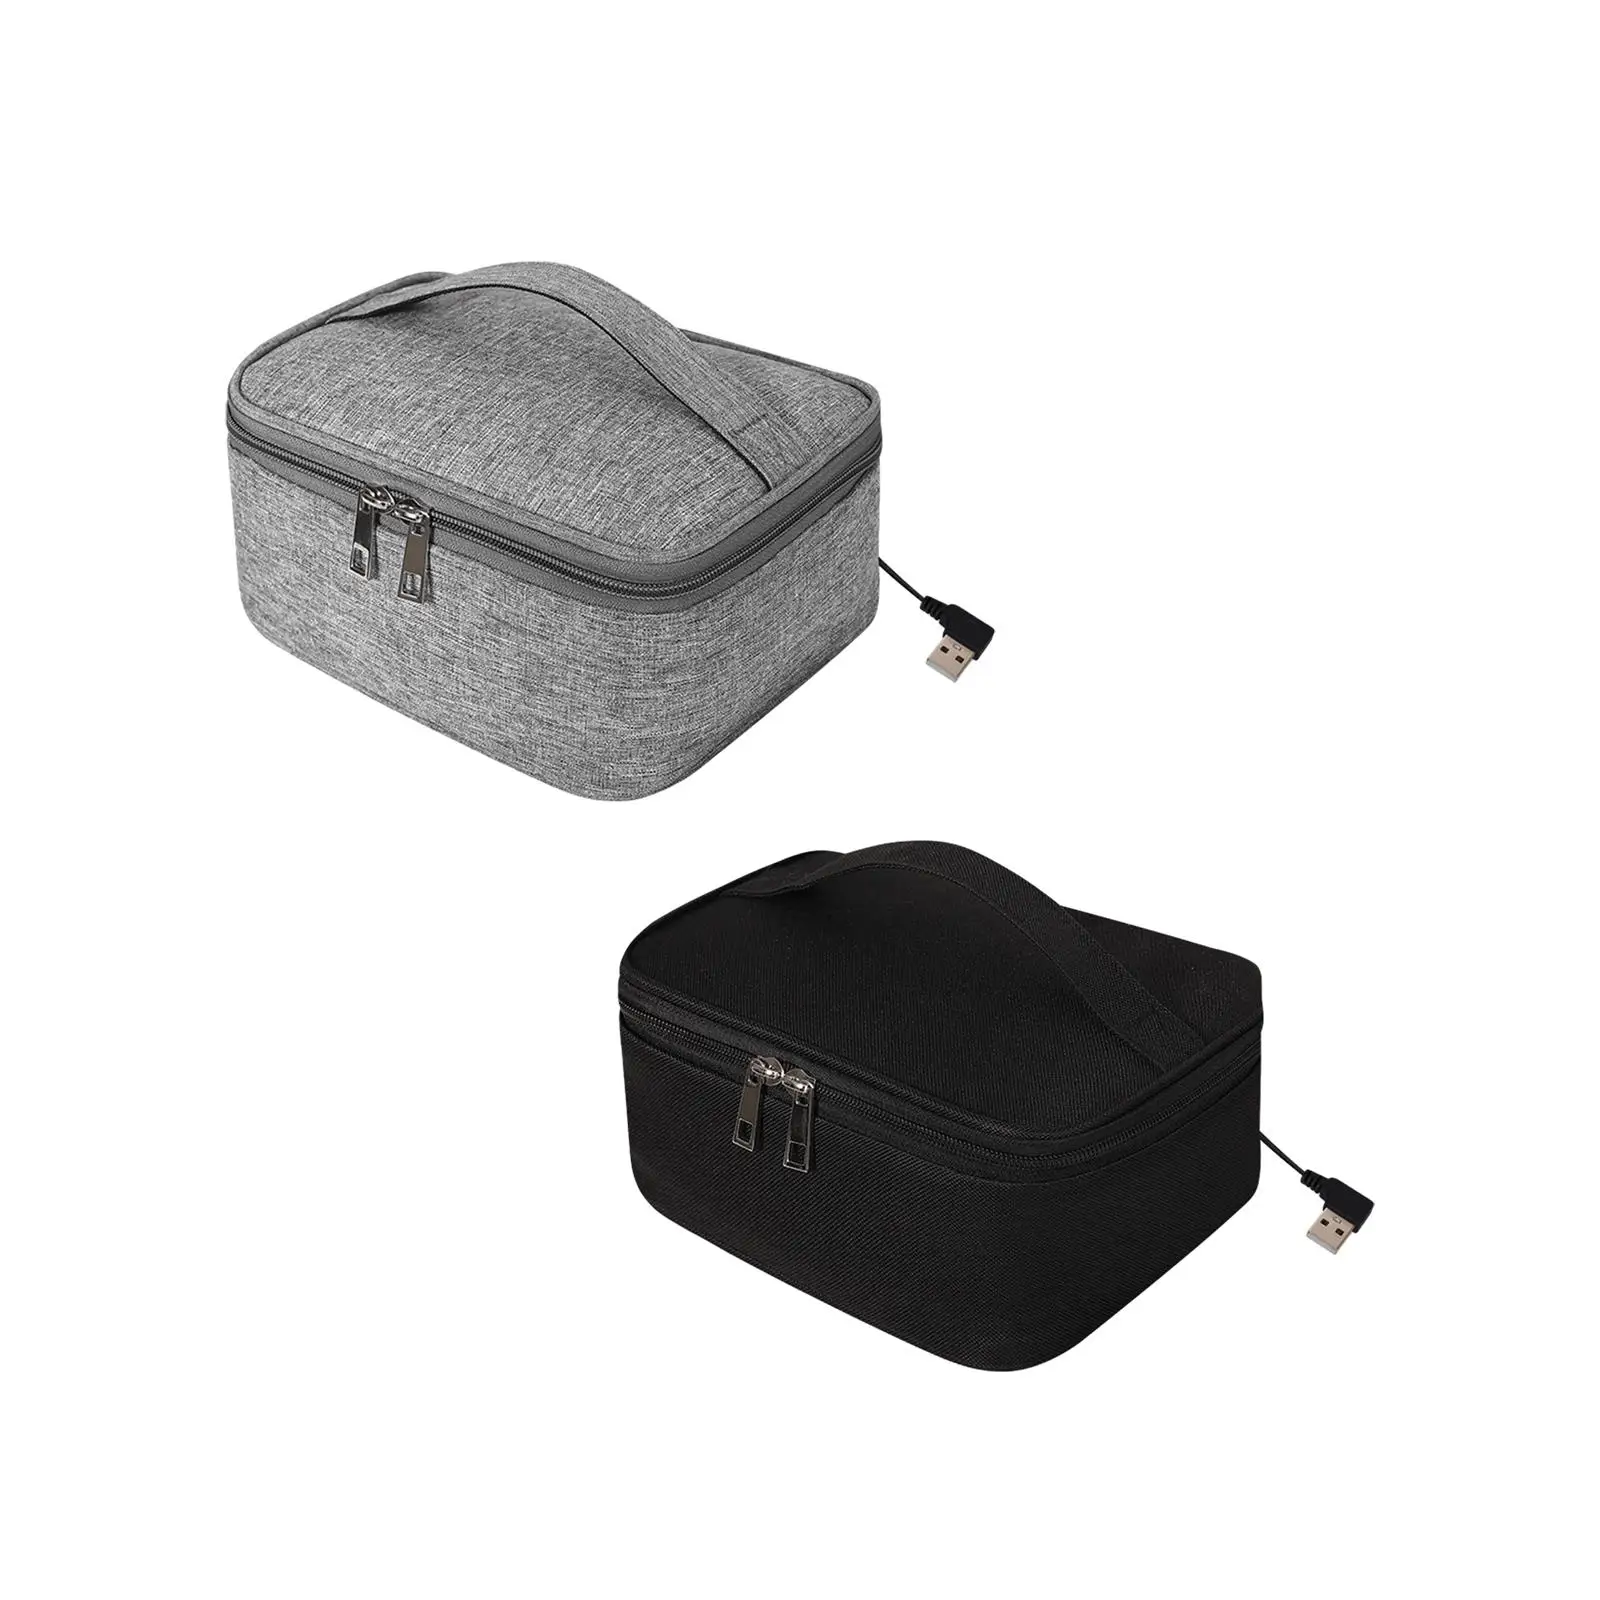 

USB Heated Lunch Boxes Bag Container Oxford Cloth Portable Convenient Food Warmer Food Insulation Bag for Camping Car Picnic